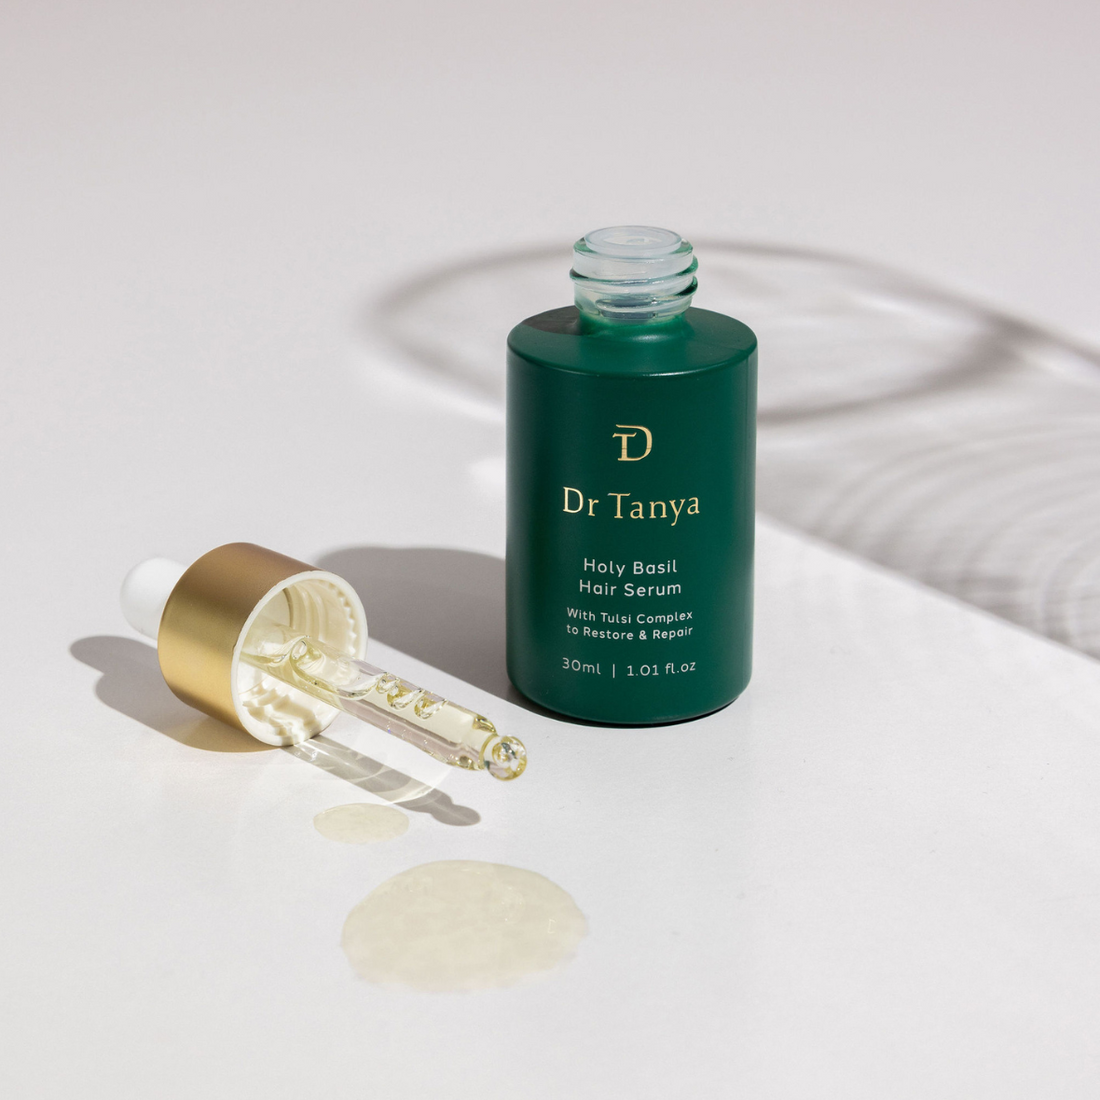 An emerald green bottle of hair serum with the dropper cap lying next to it